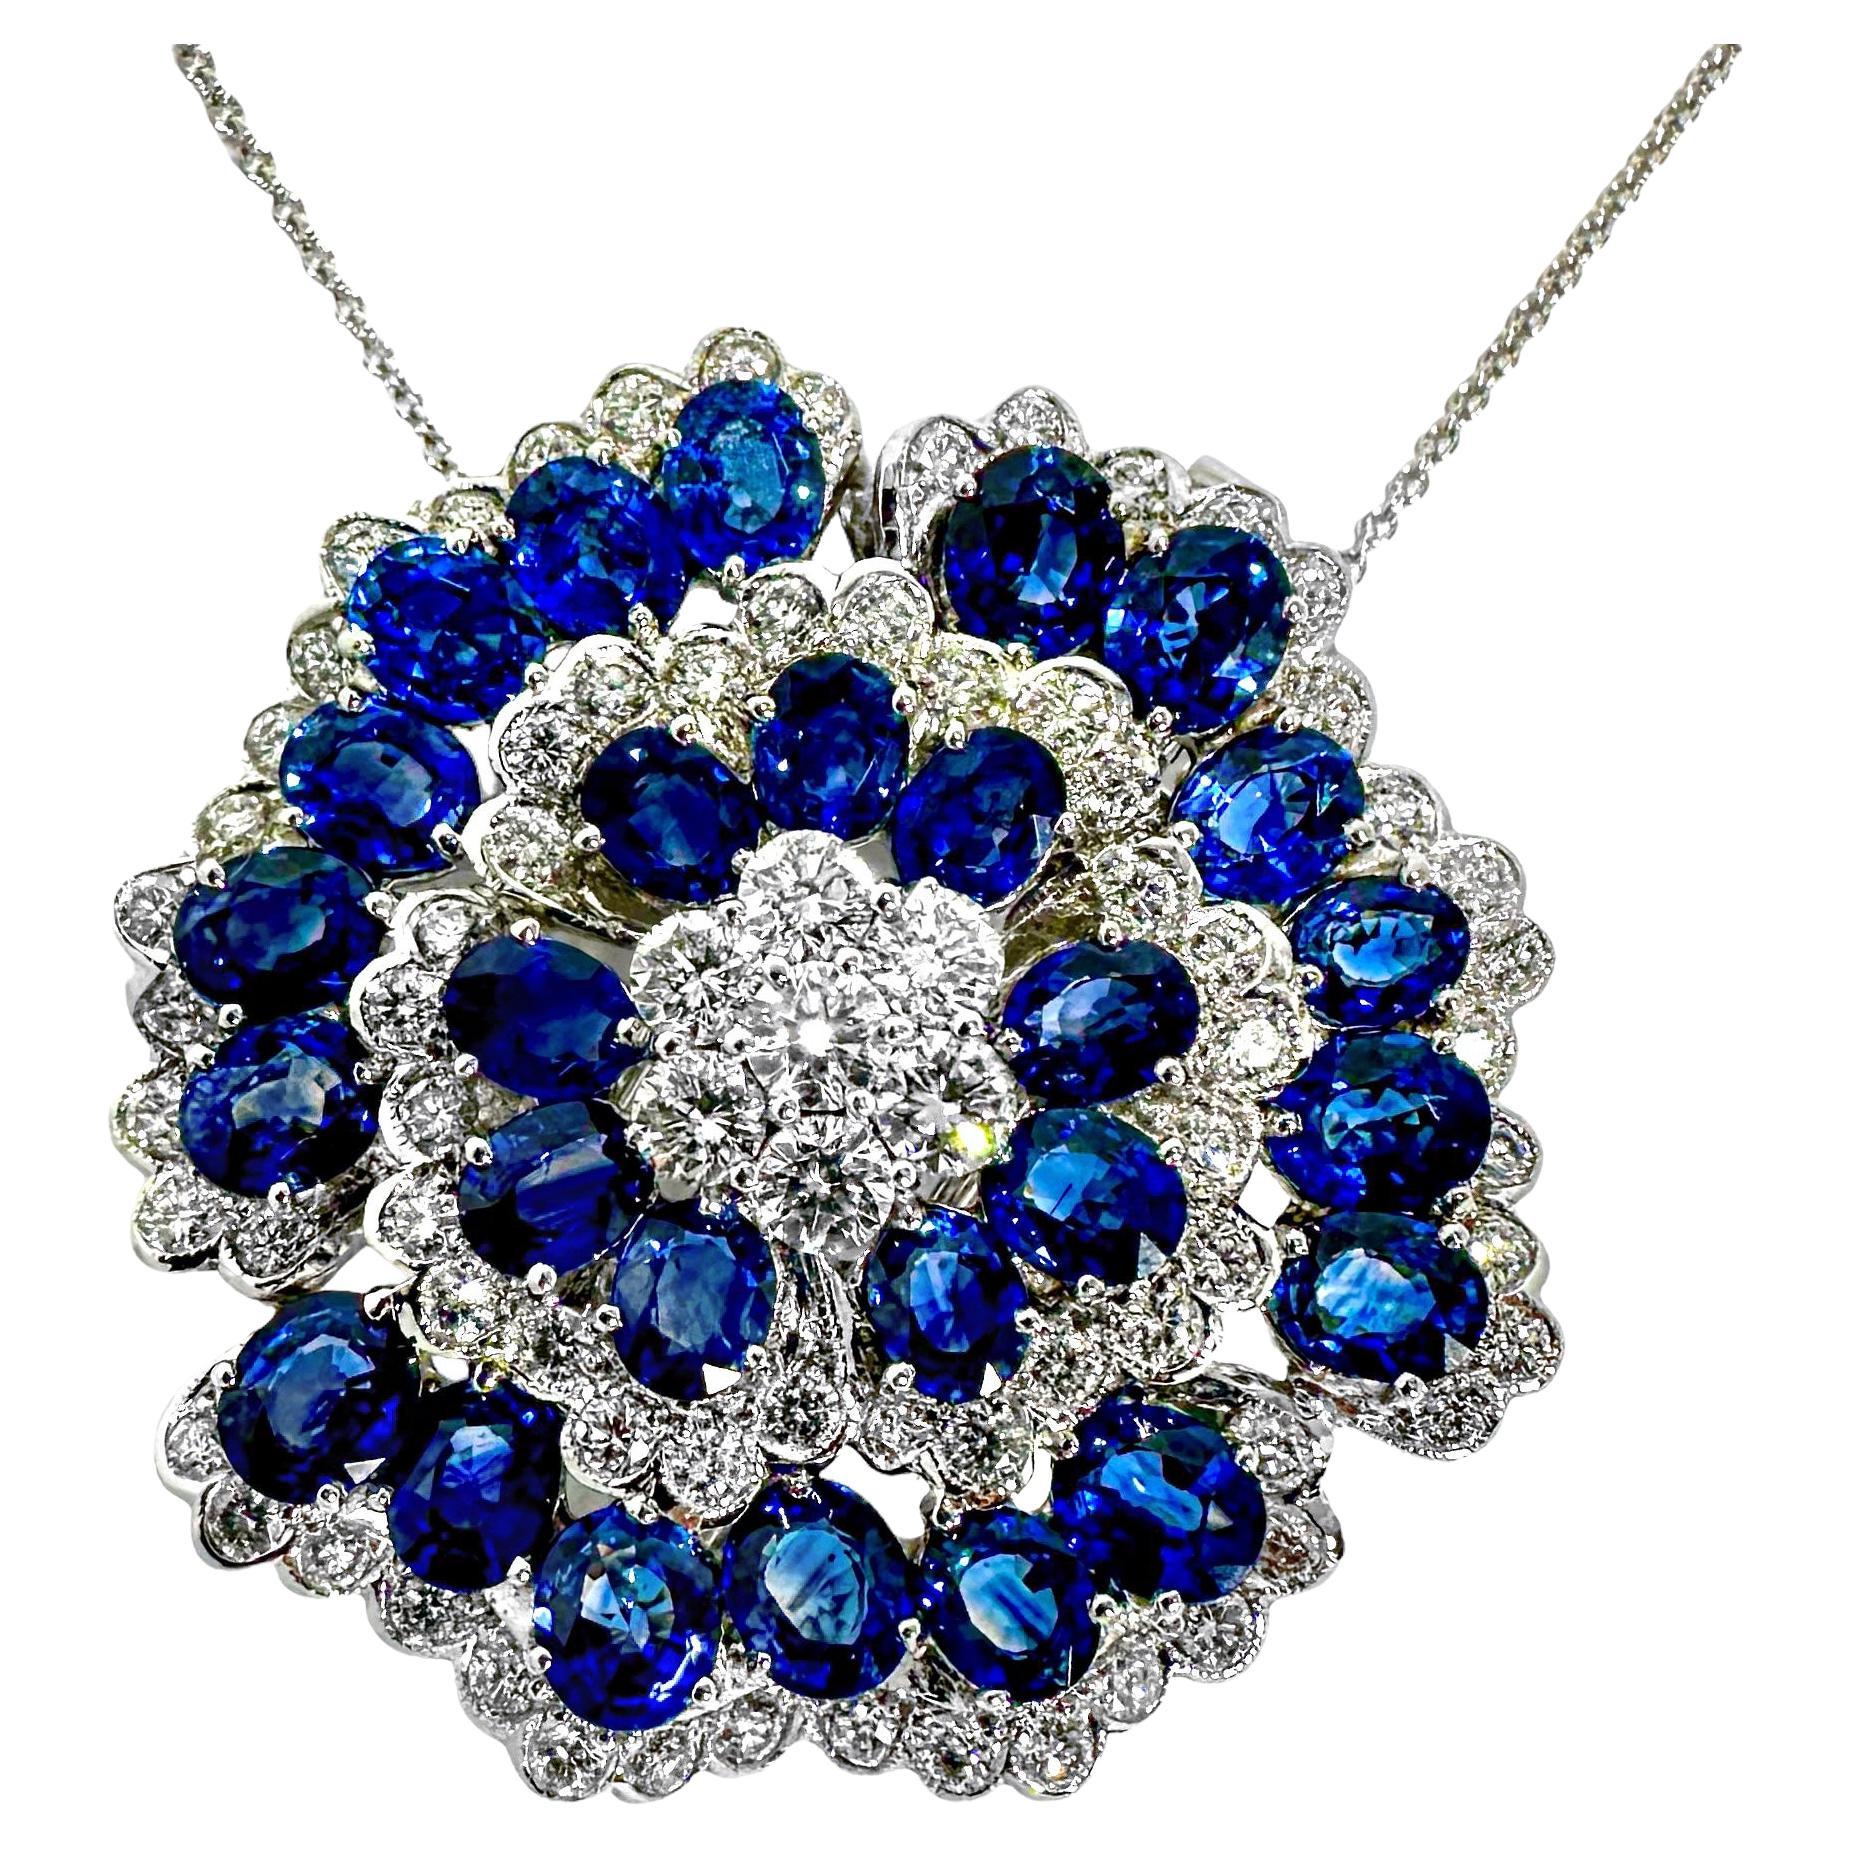 Glittering 18k White Gold Camellia Flower set with Diamonds and Blue Sapphires